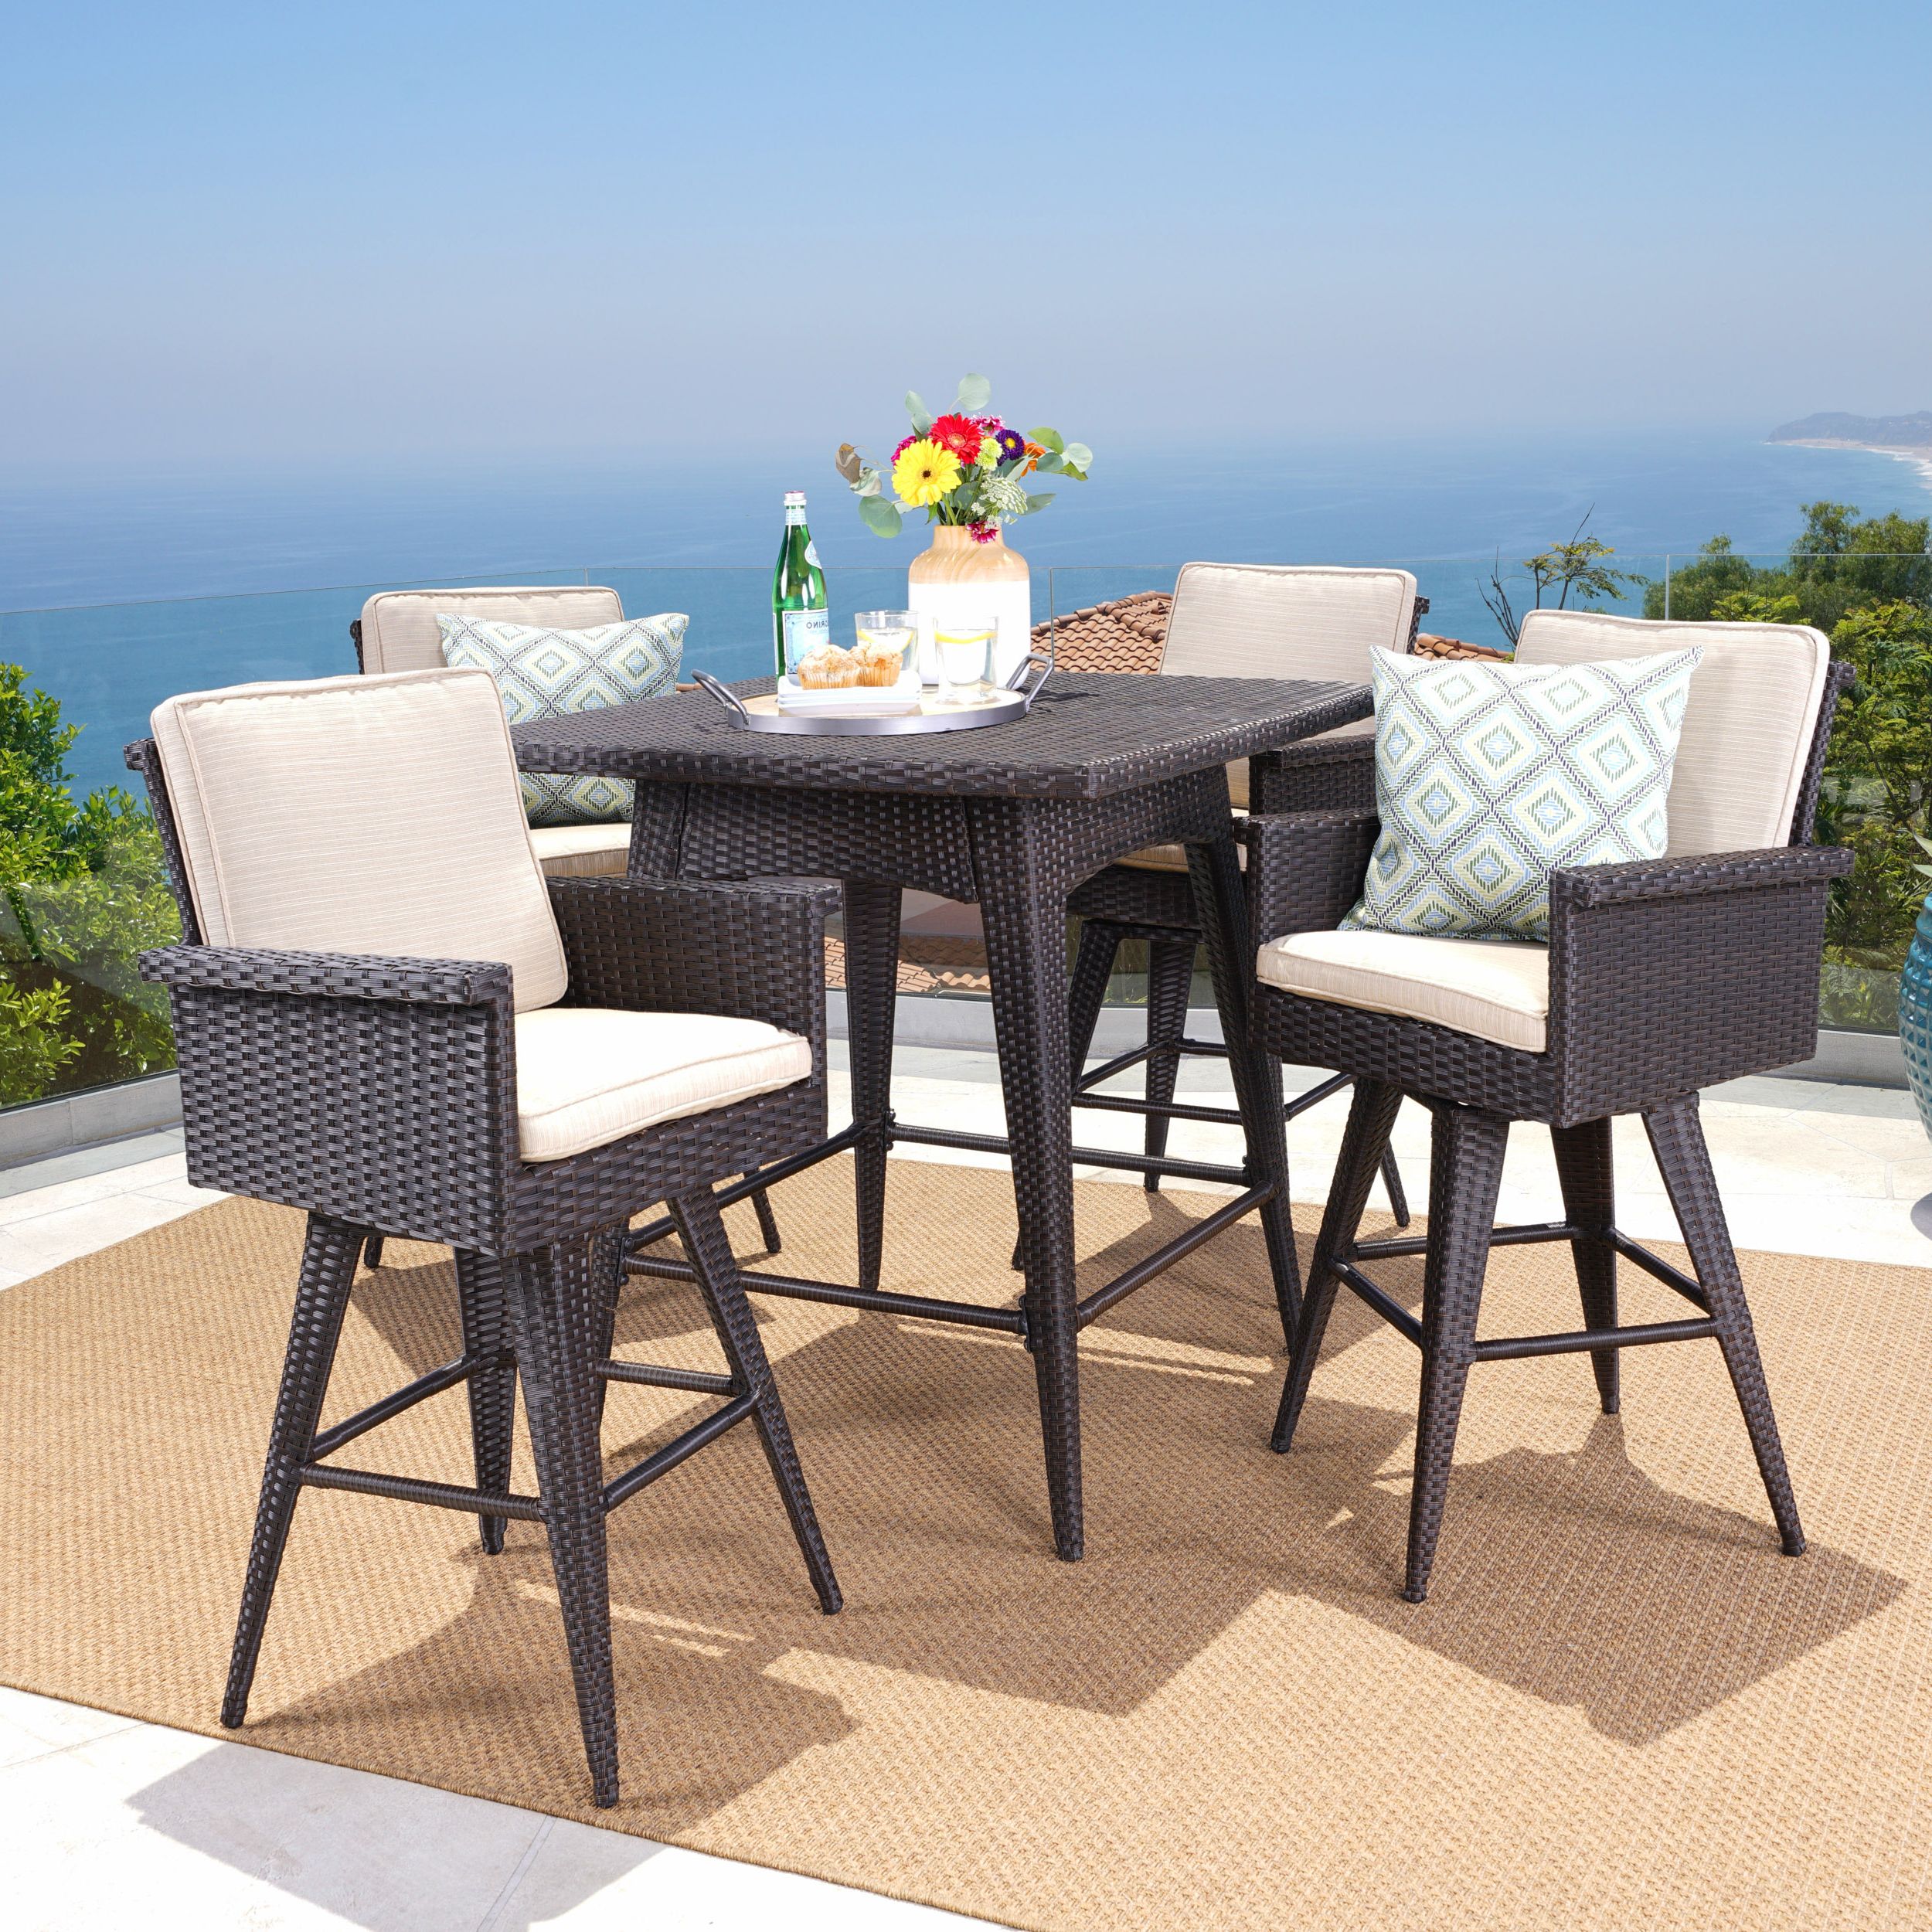 Marianne Outdoor 5 Piece Wicker Bar Height Dining Set With Sunbrella Regarding Best And Newest 5 Piece Outdoor Seating Patio Sets (View 1 of 15)